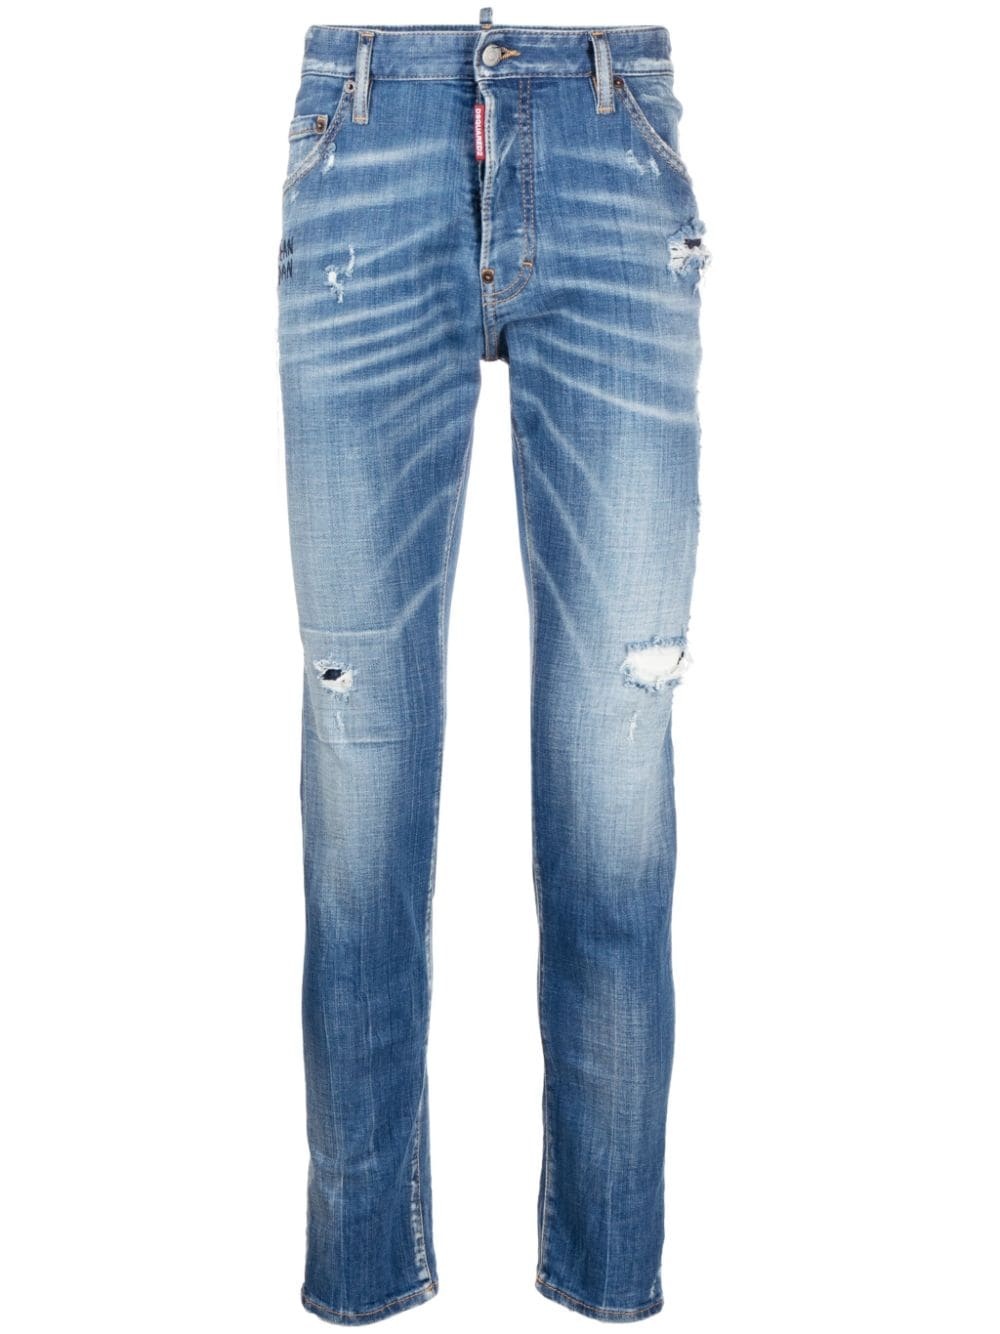 Cool Guy distressed skinny jeans - 1